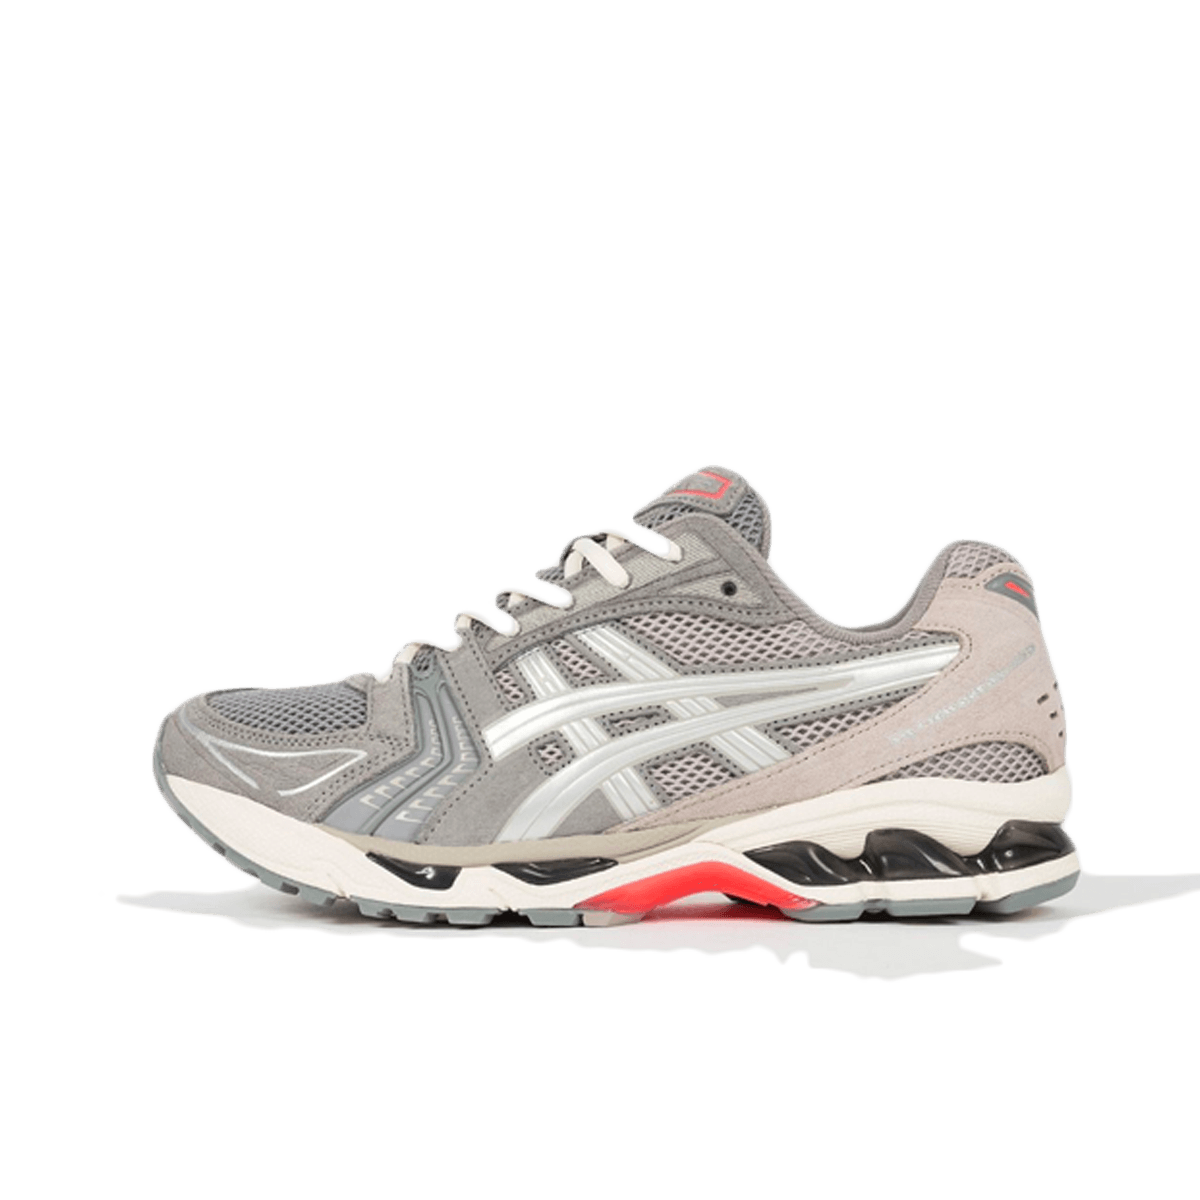 ASICS SportStyle GEL-Kayano 14 'Pure Silver' 1201A161-026